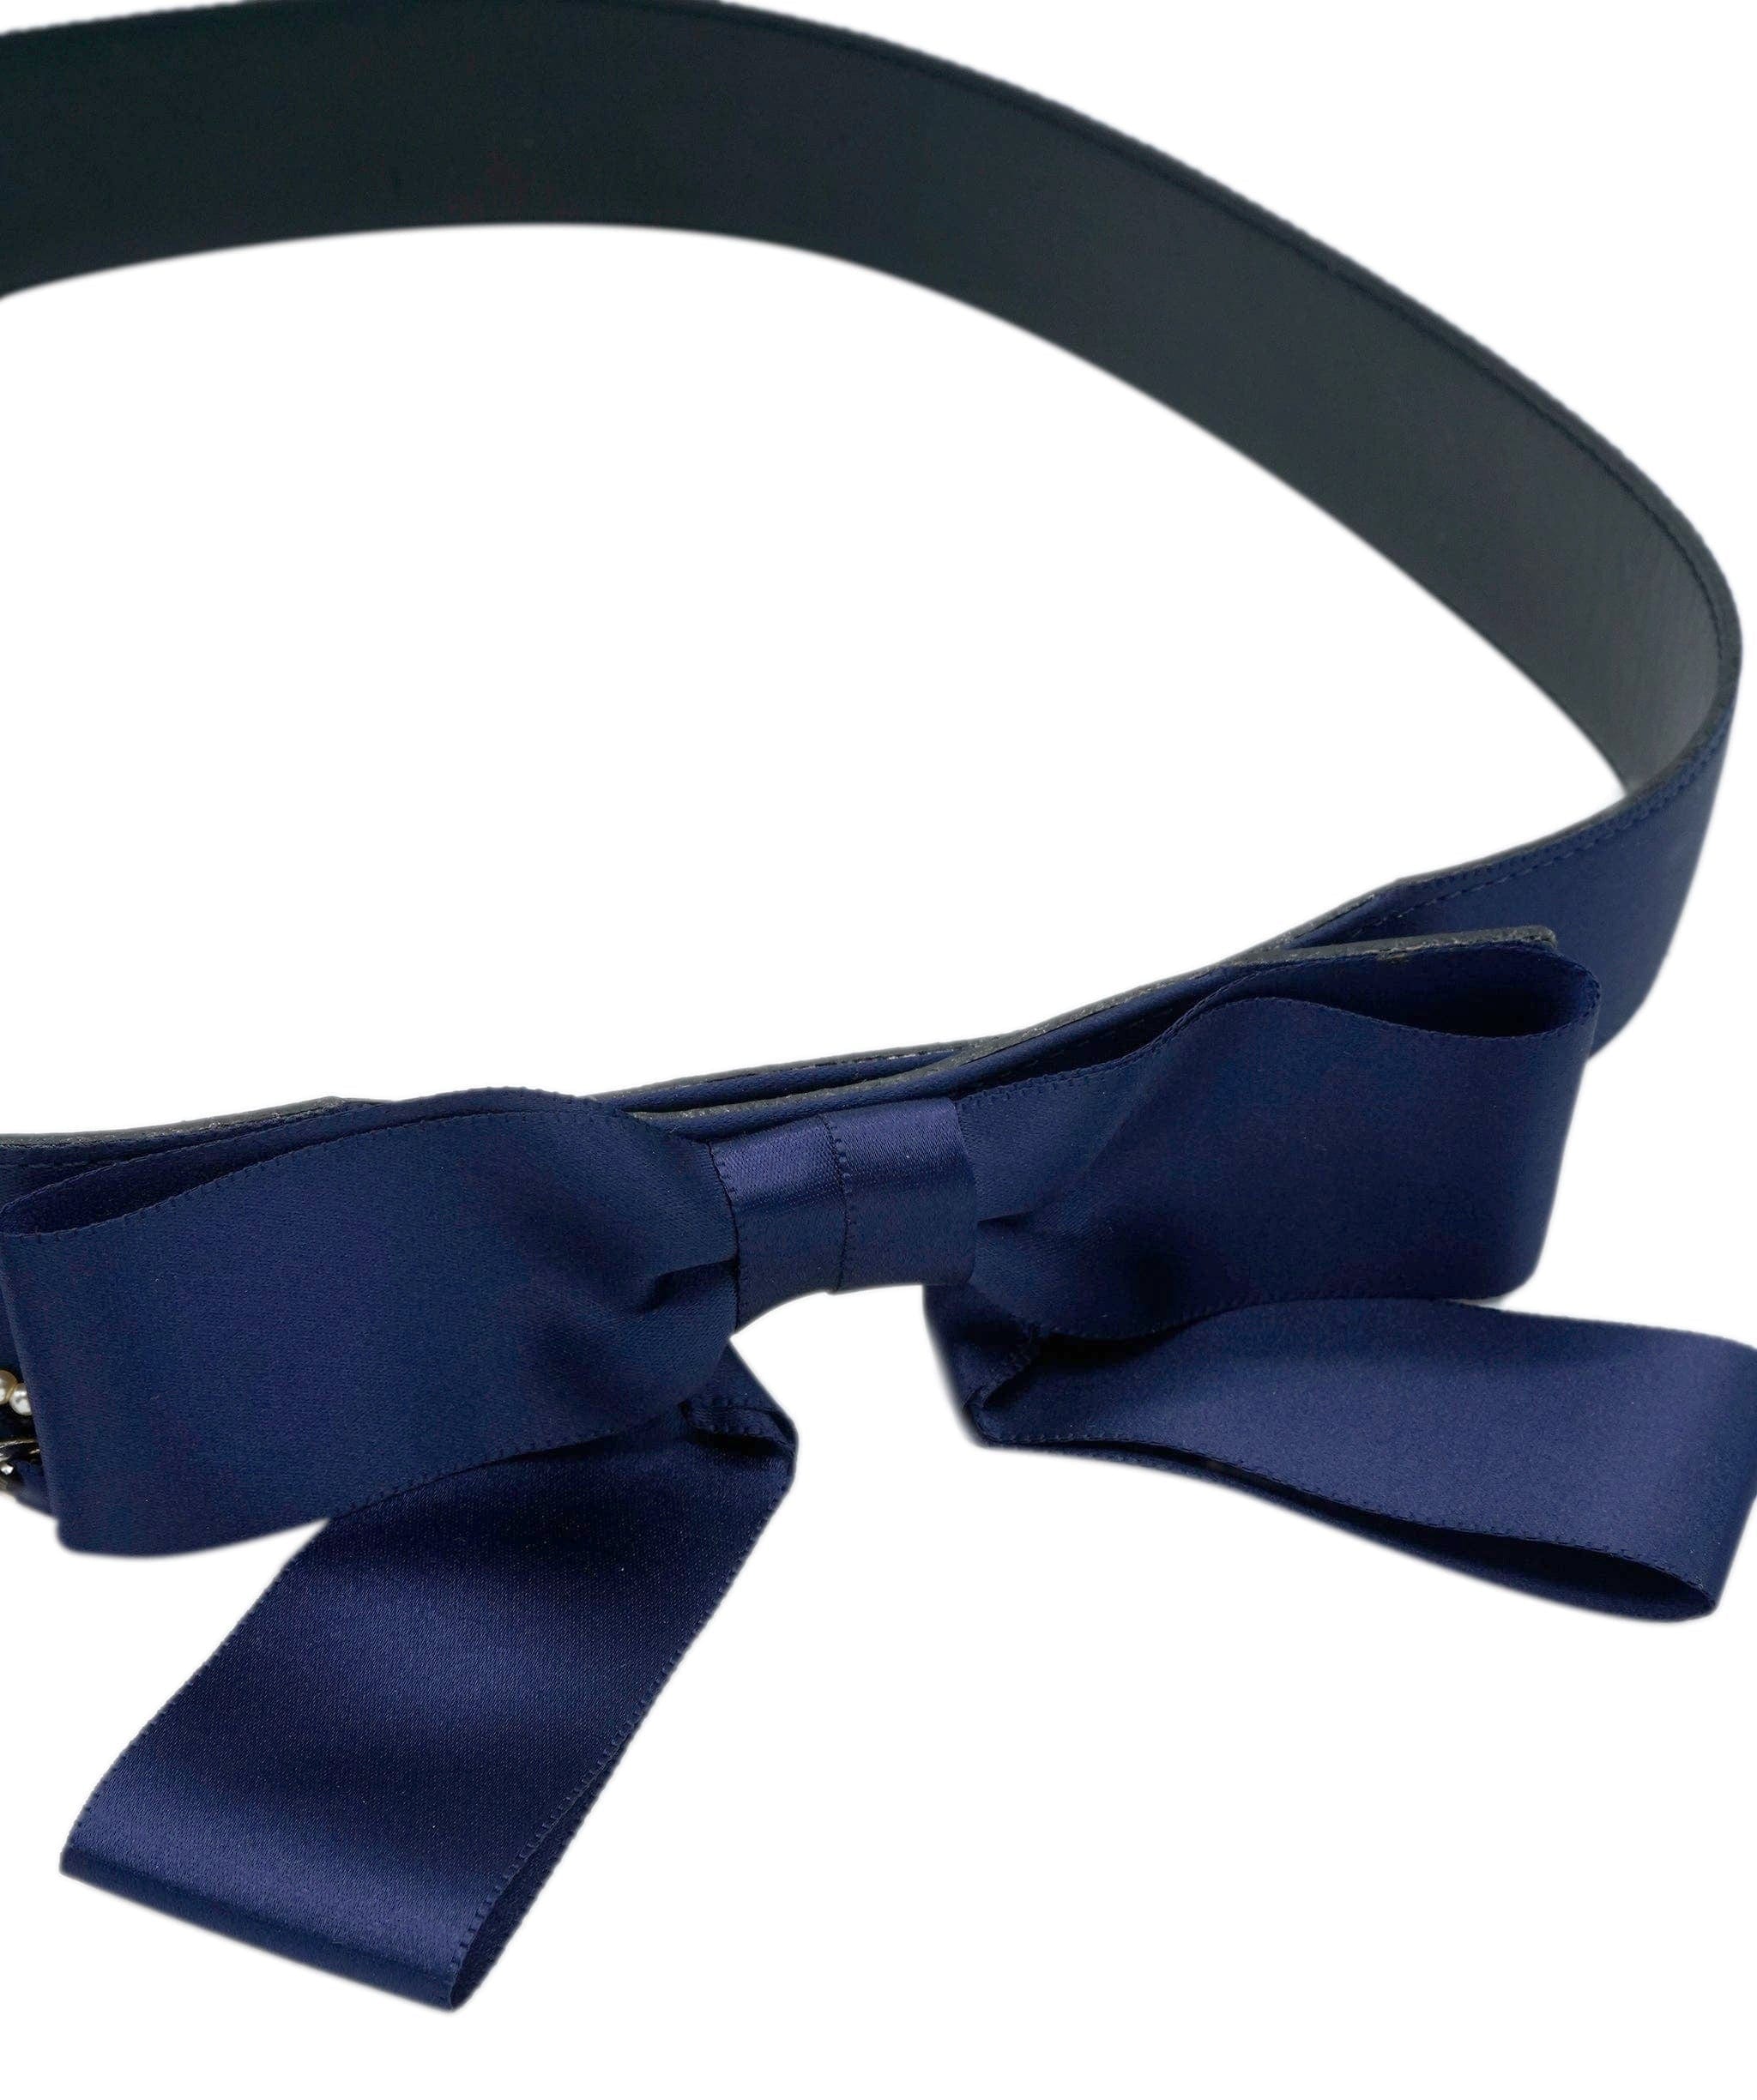 Chanel Chanel Belt Navy Satin Bow and Pearl Detail Size 80 AGC1472